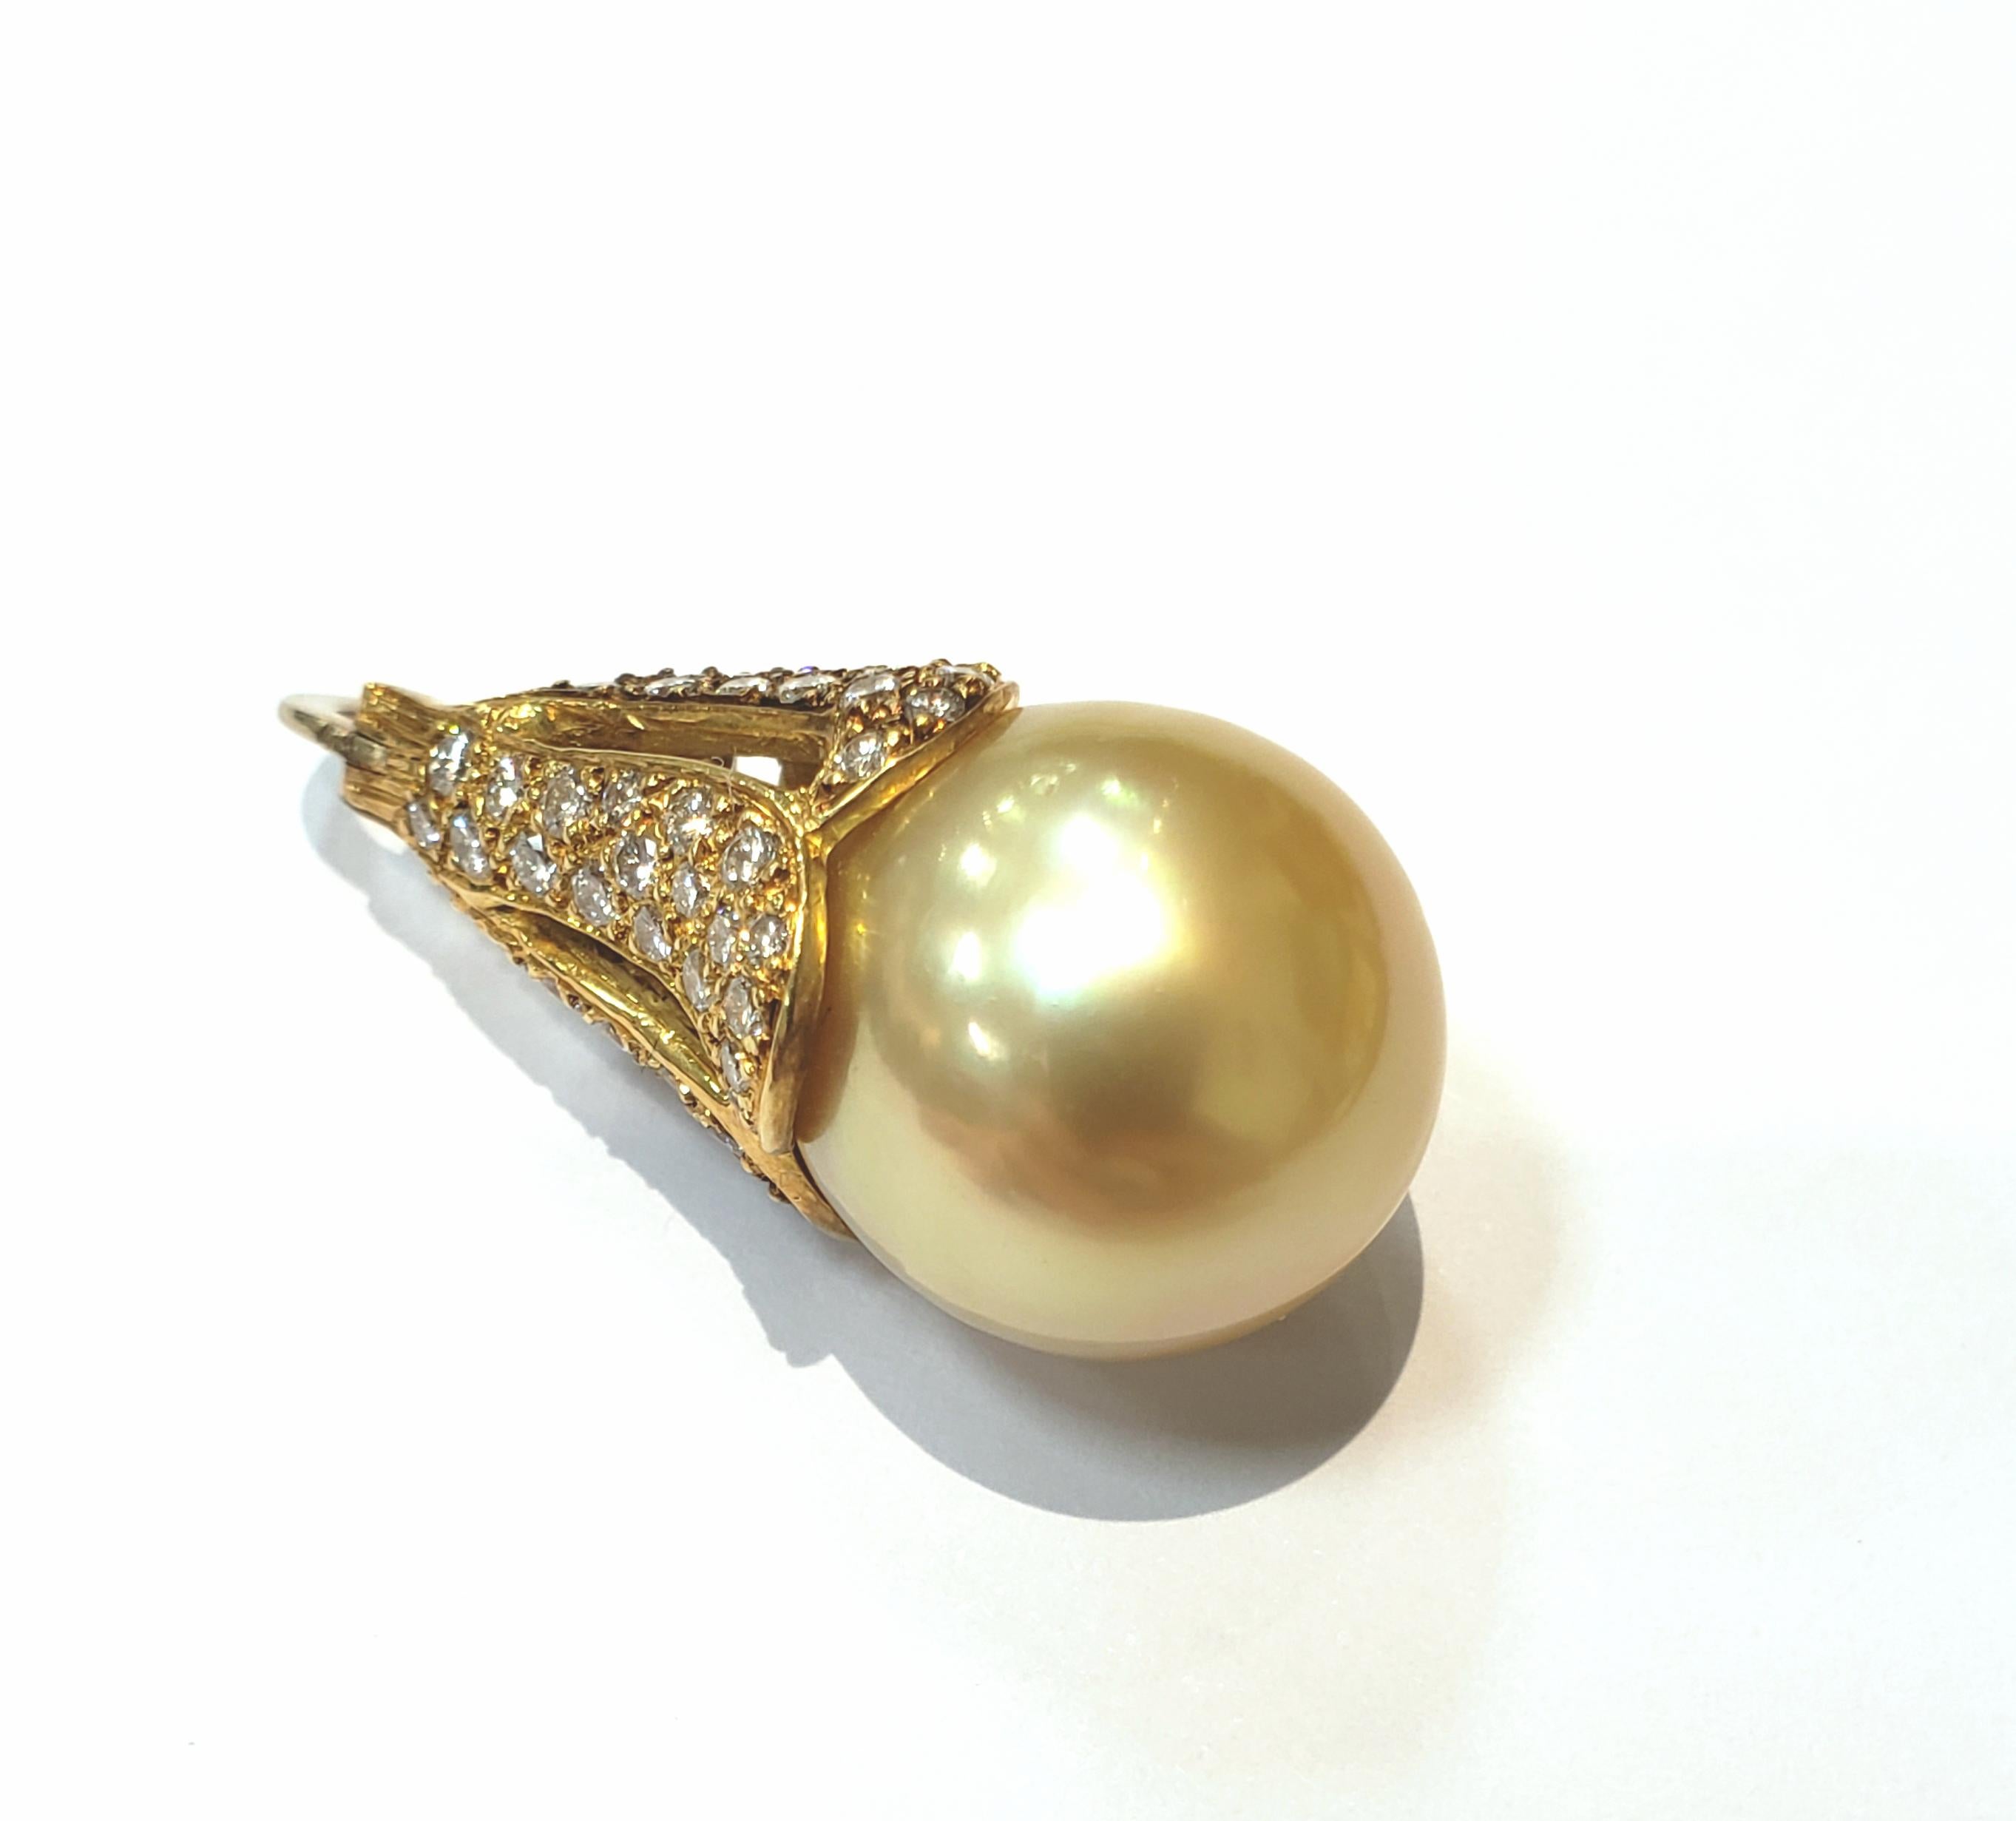 A beautiful golden 15mm South Sea pearl, with an 18 karat yellow gold and diamond top, pearl enhancer.
Top has 3 sections, each set with full cut round brilliant diamonds. Total diamond weight is 0.44 carats. F-G color, VS1 clarity.
Enhancer has a